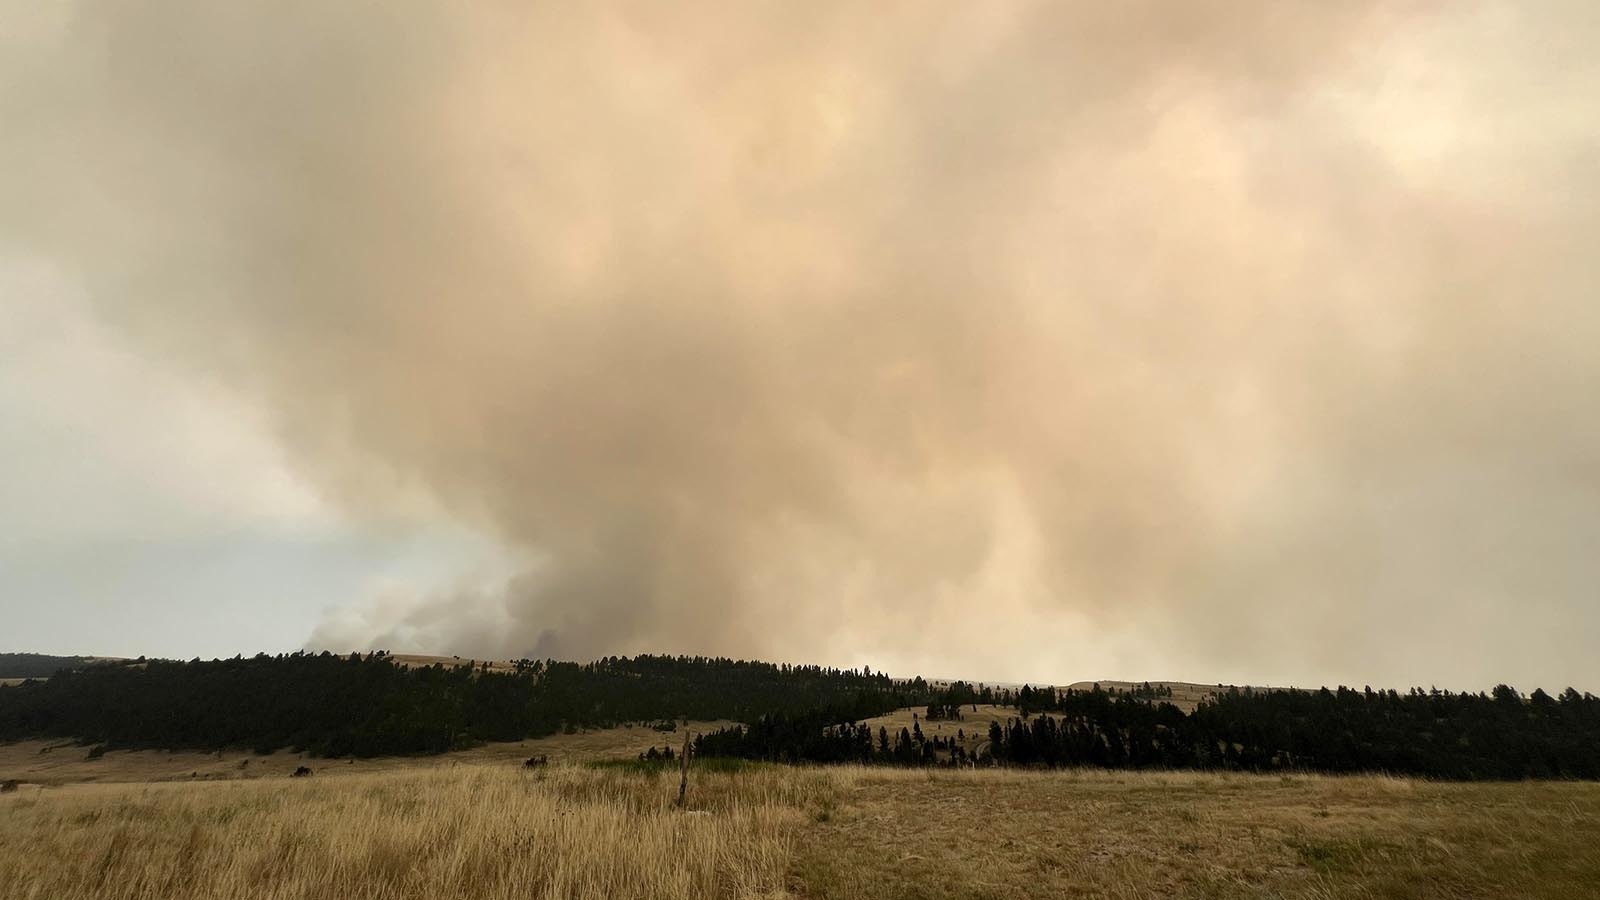 An out-of-control wildfire burns close to the Kindness Ranch in eastern Wyoming.